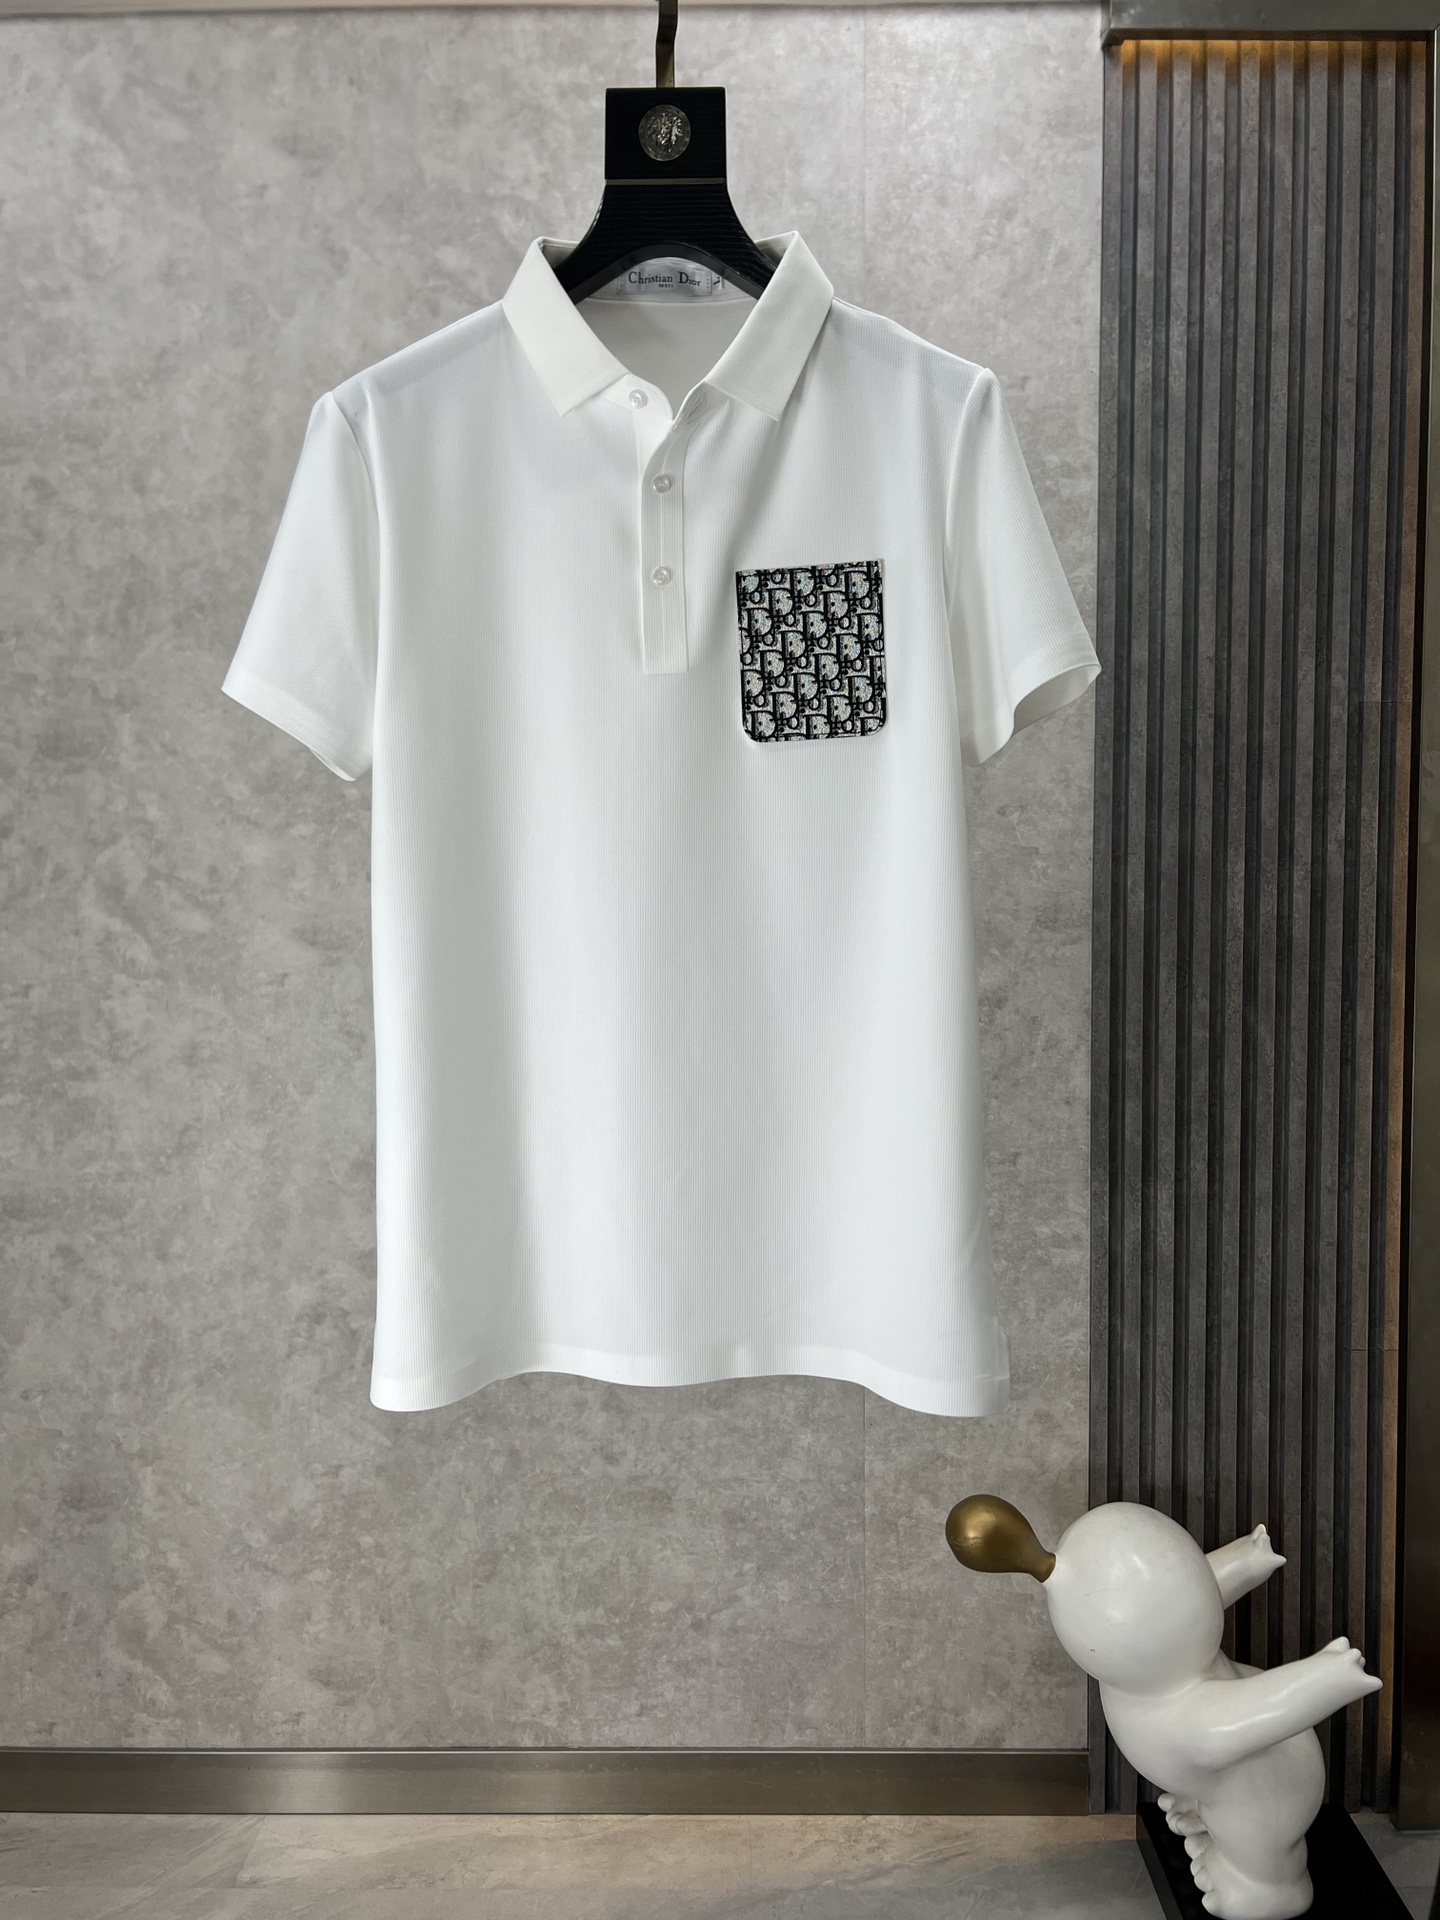 How to Find Designer Replica
 Dior Clothing Polo T-Shirt Perfect Quality Cotton Spring/Summer Collection Short Sleeve